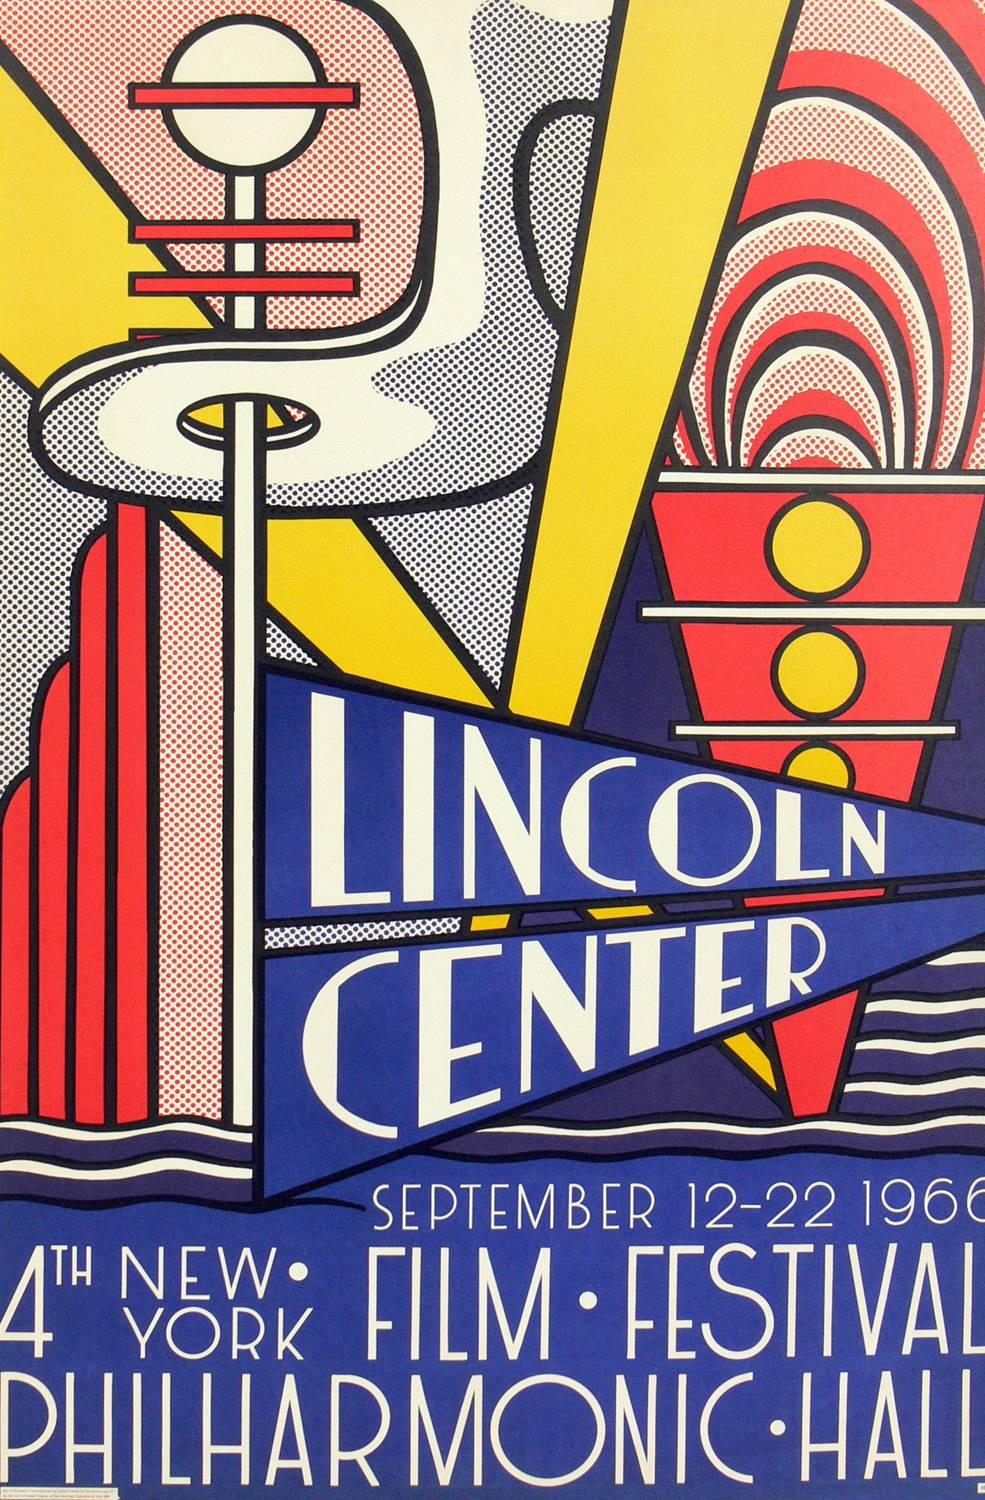 Lincoln center film festival color lithograph, by Roy Lichtenstein, circa 1966. It measures an impressive 48